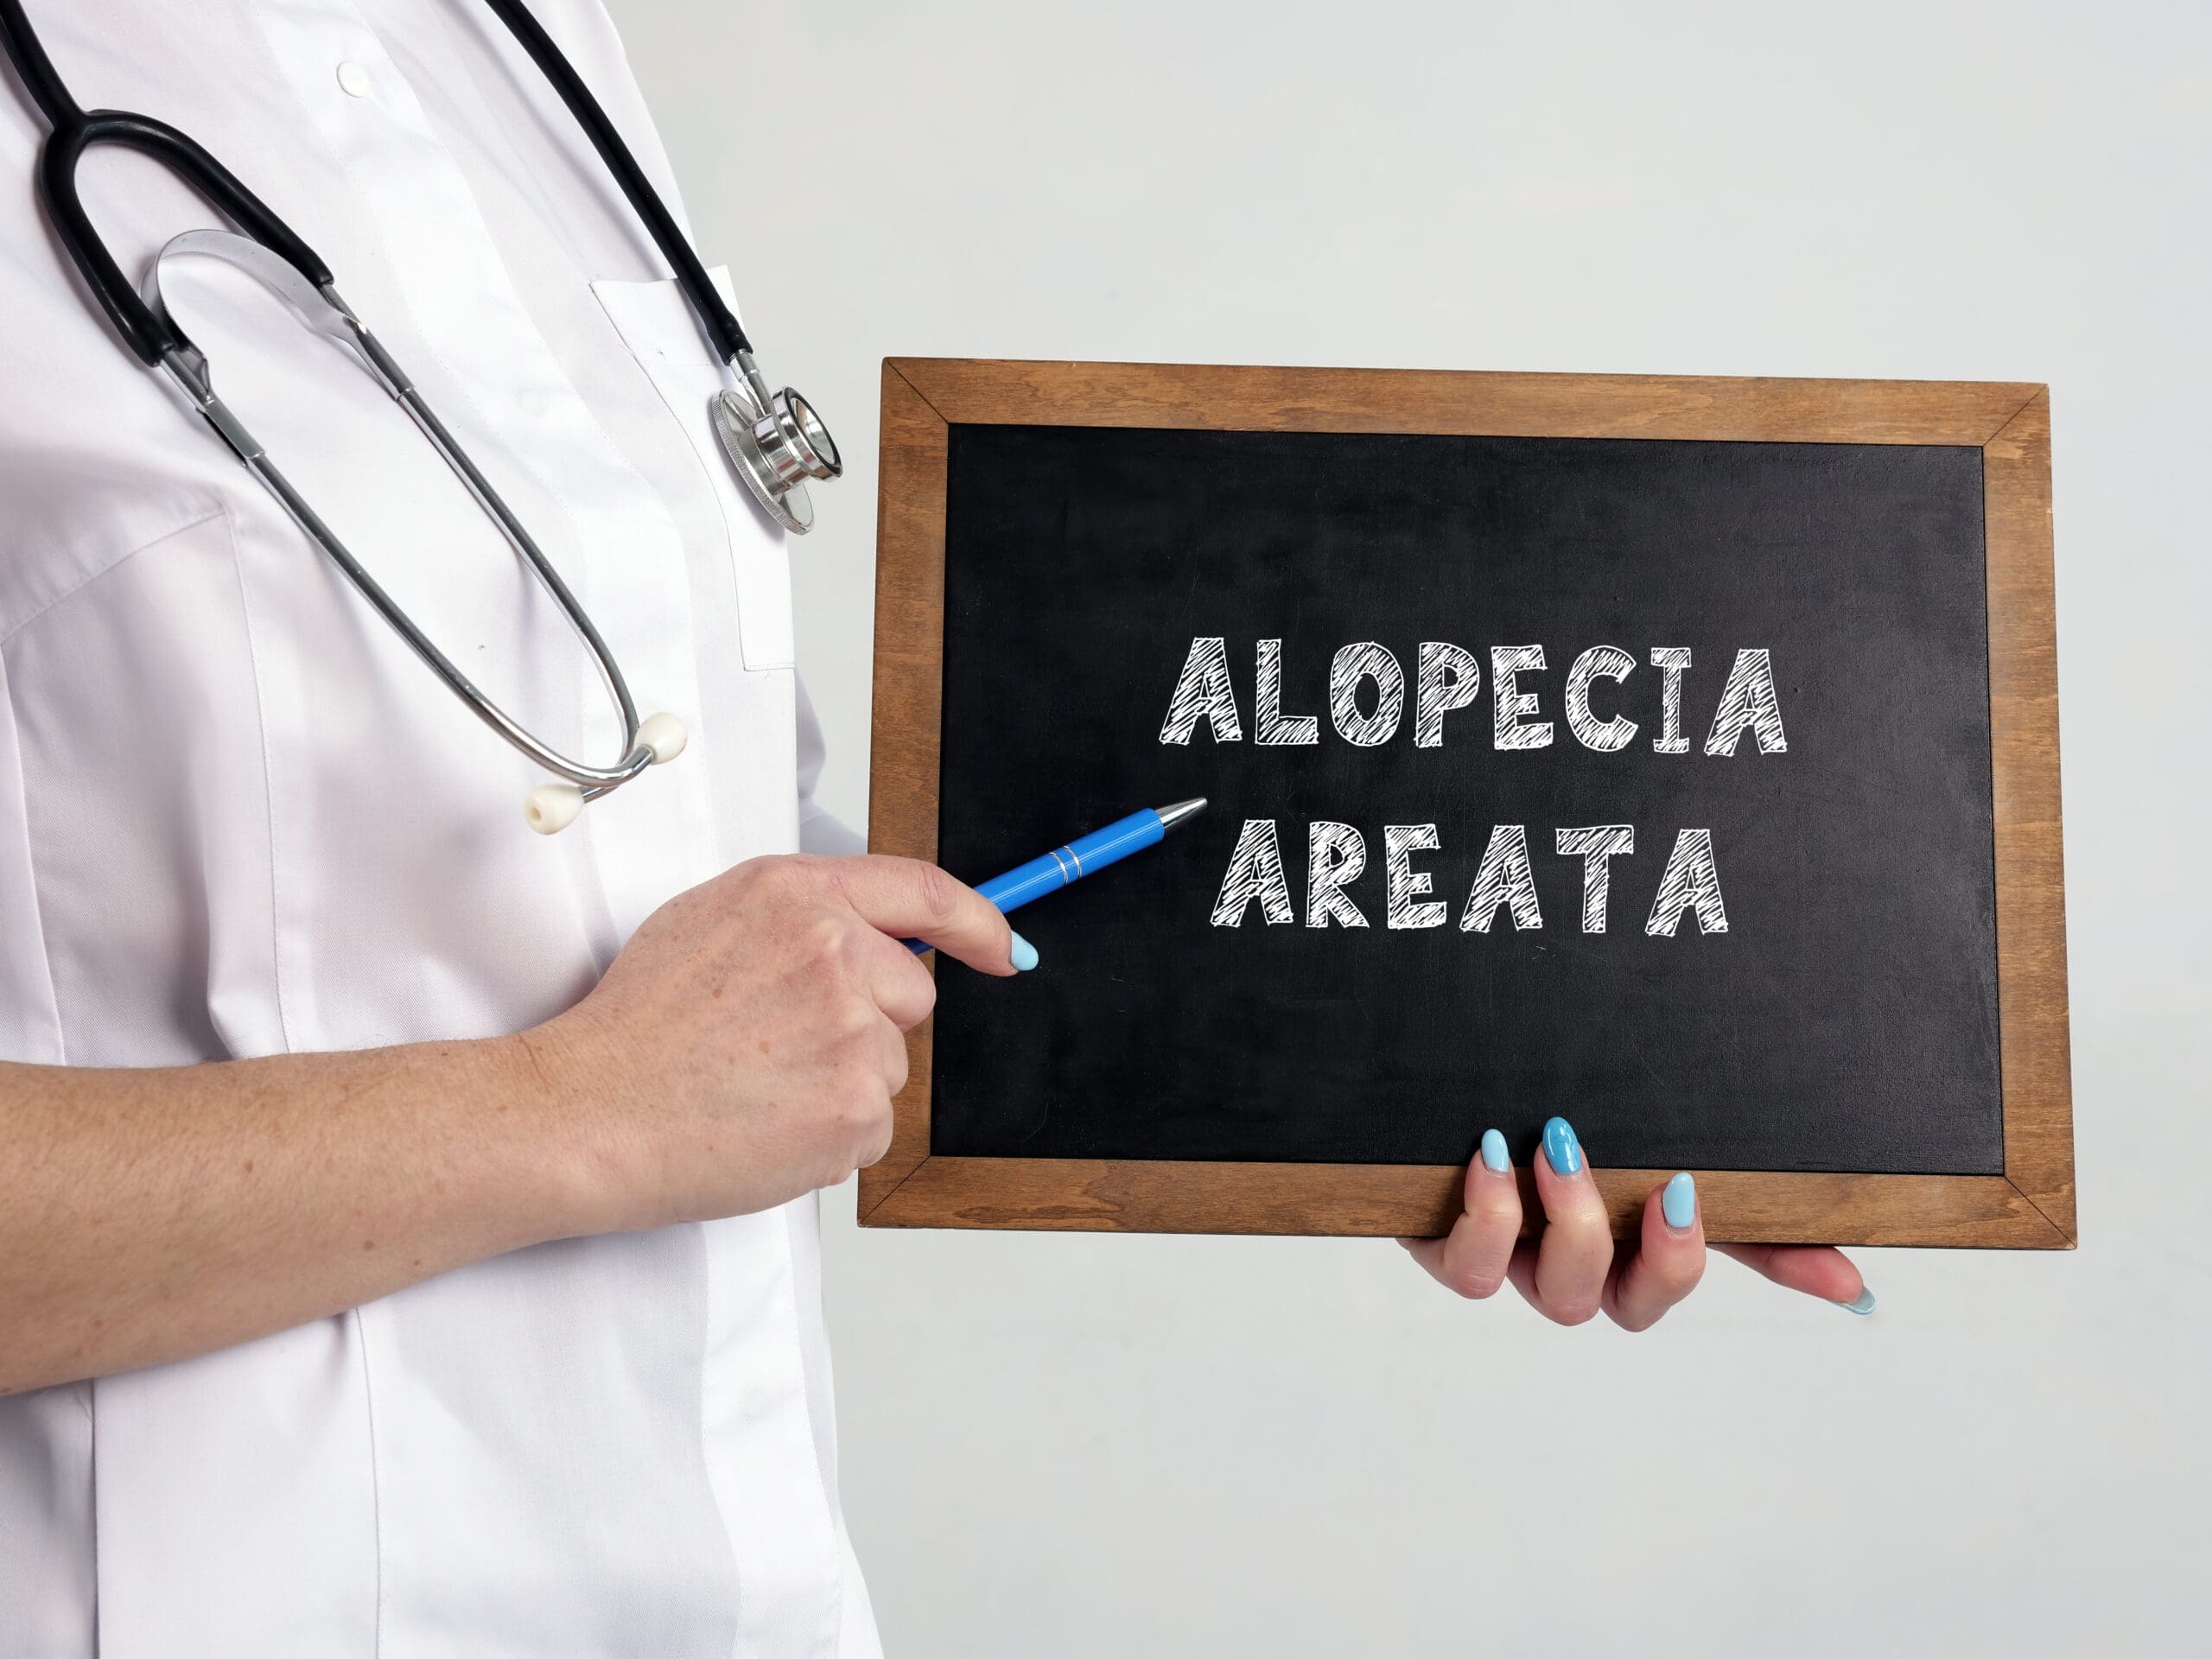 New Hope For 500,000 Australians Affected By Alopecia Areata